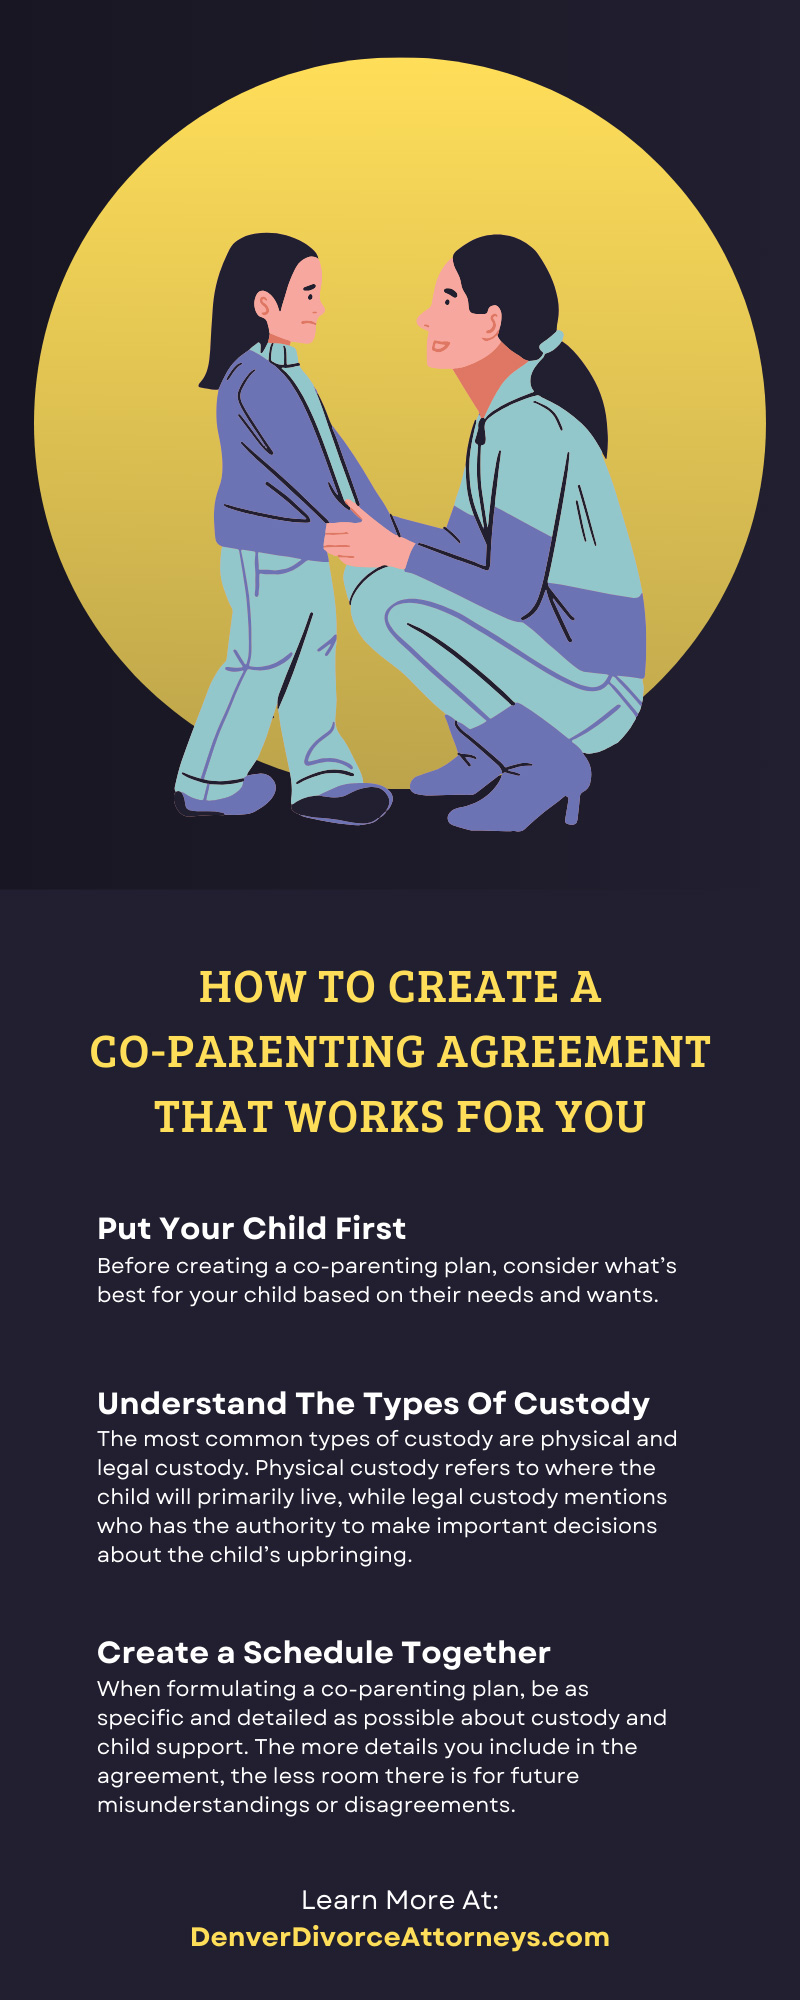 How To Create a Co-Parenting Agreement That Works for You
